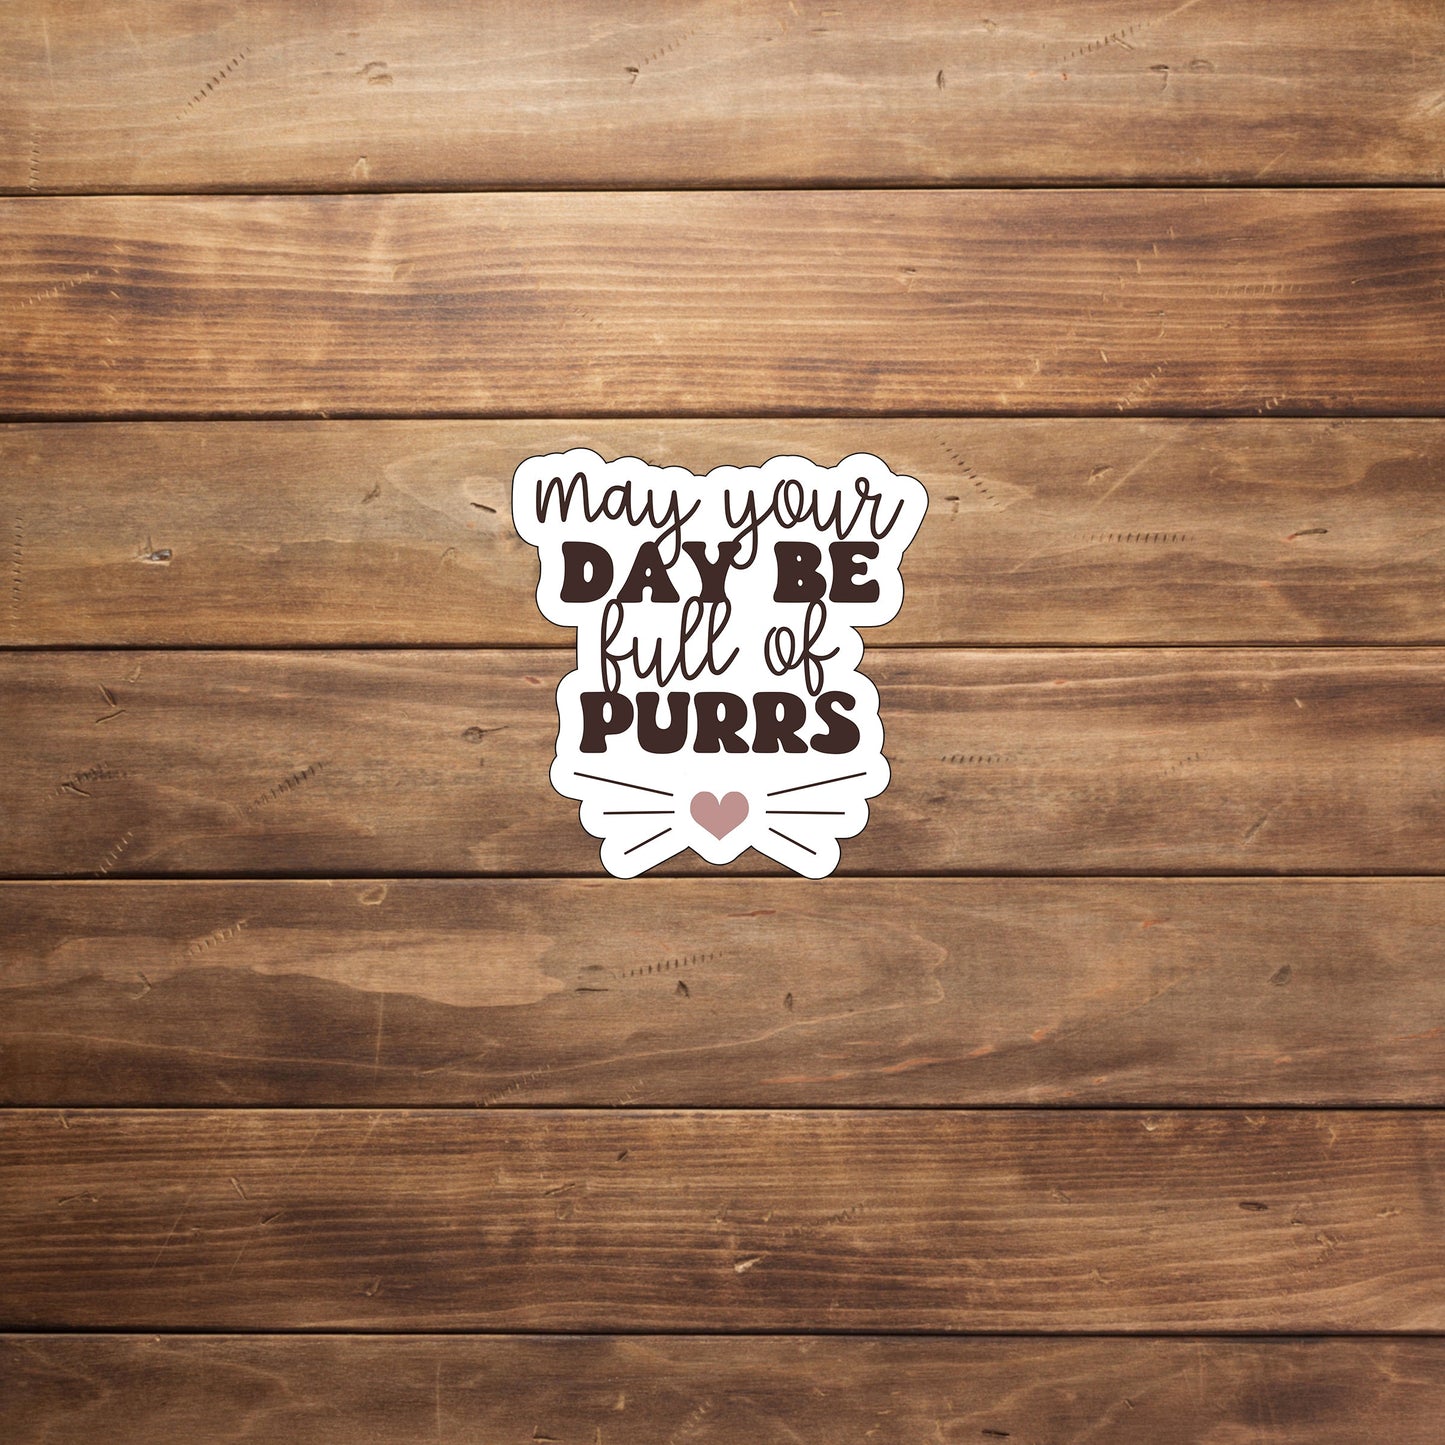 May your day be full of purrs  Sticker,  Vinyl sticker, laptop sticker, Tablet sticker